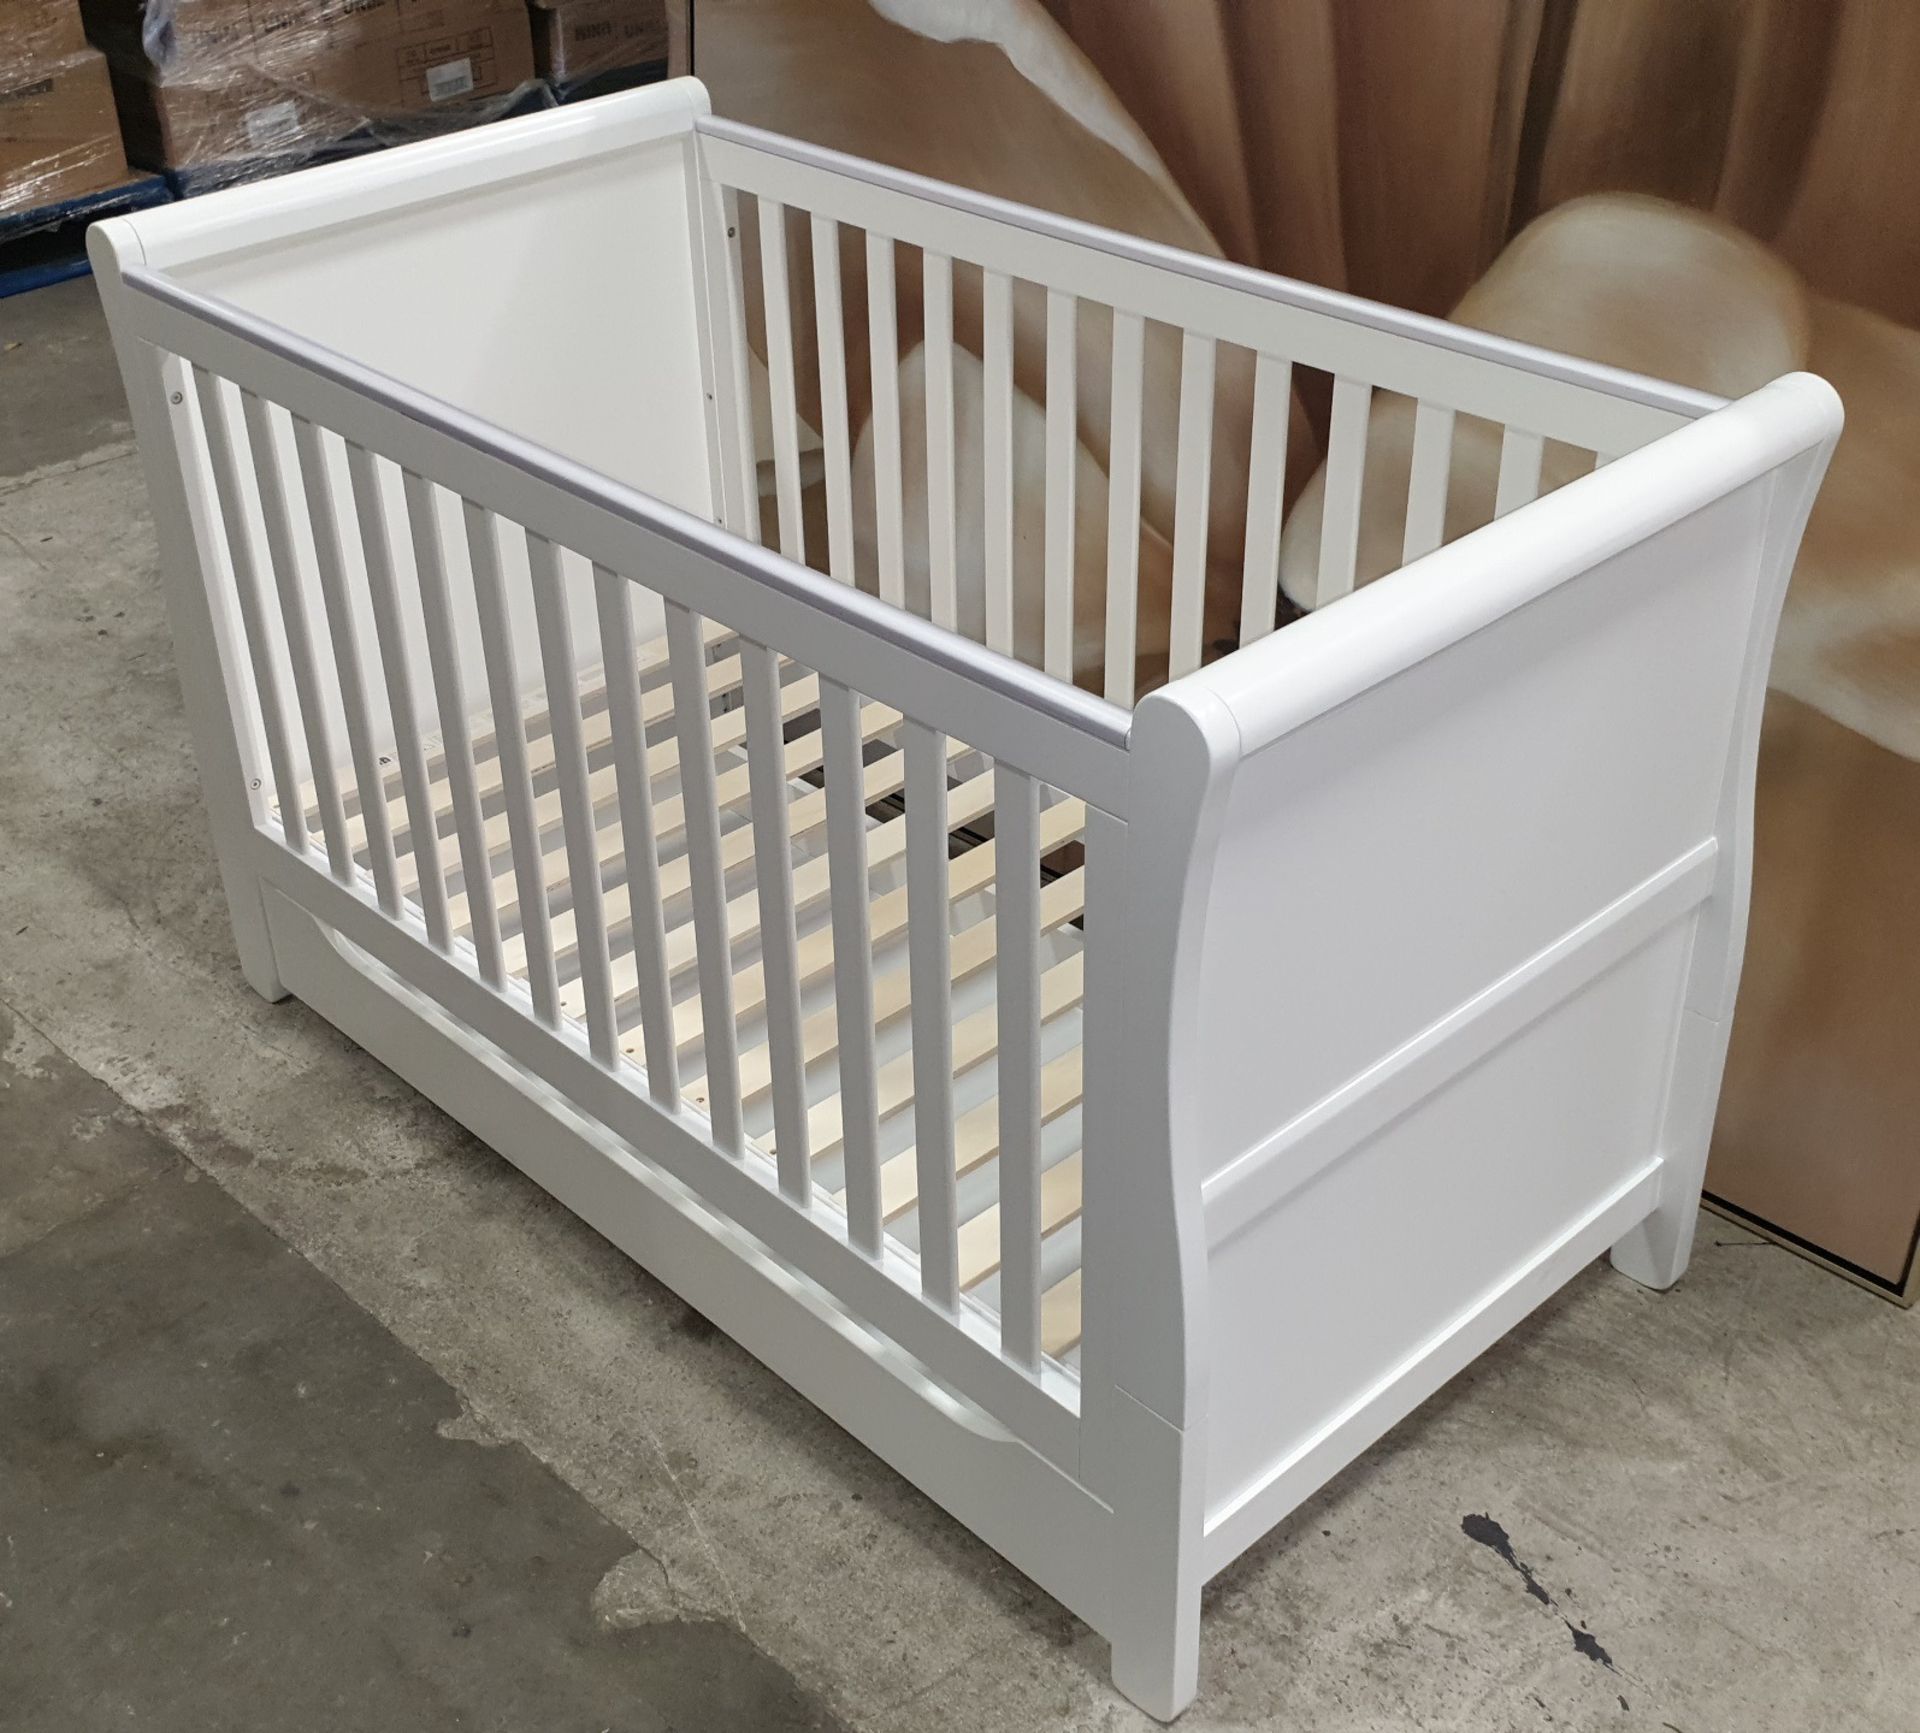 BRAND NEW MOTHERCARE HIGH GLOSS WHITE SLEIGH COT BED WITH STORAGE DRAWER - (KB488) - RRP £299 - IN 2